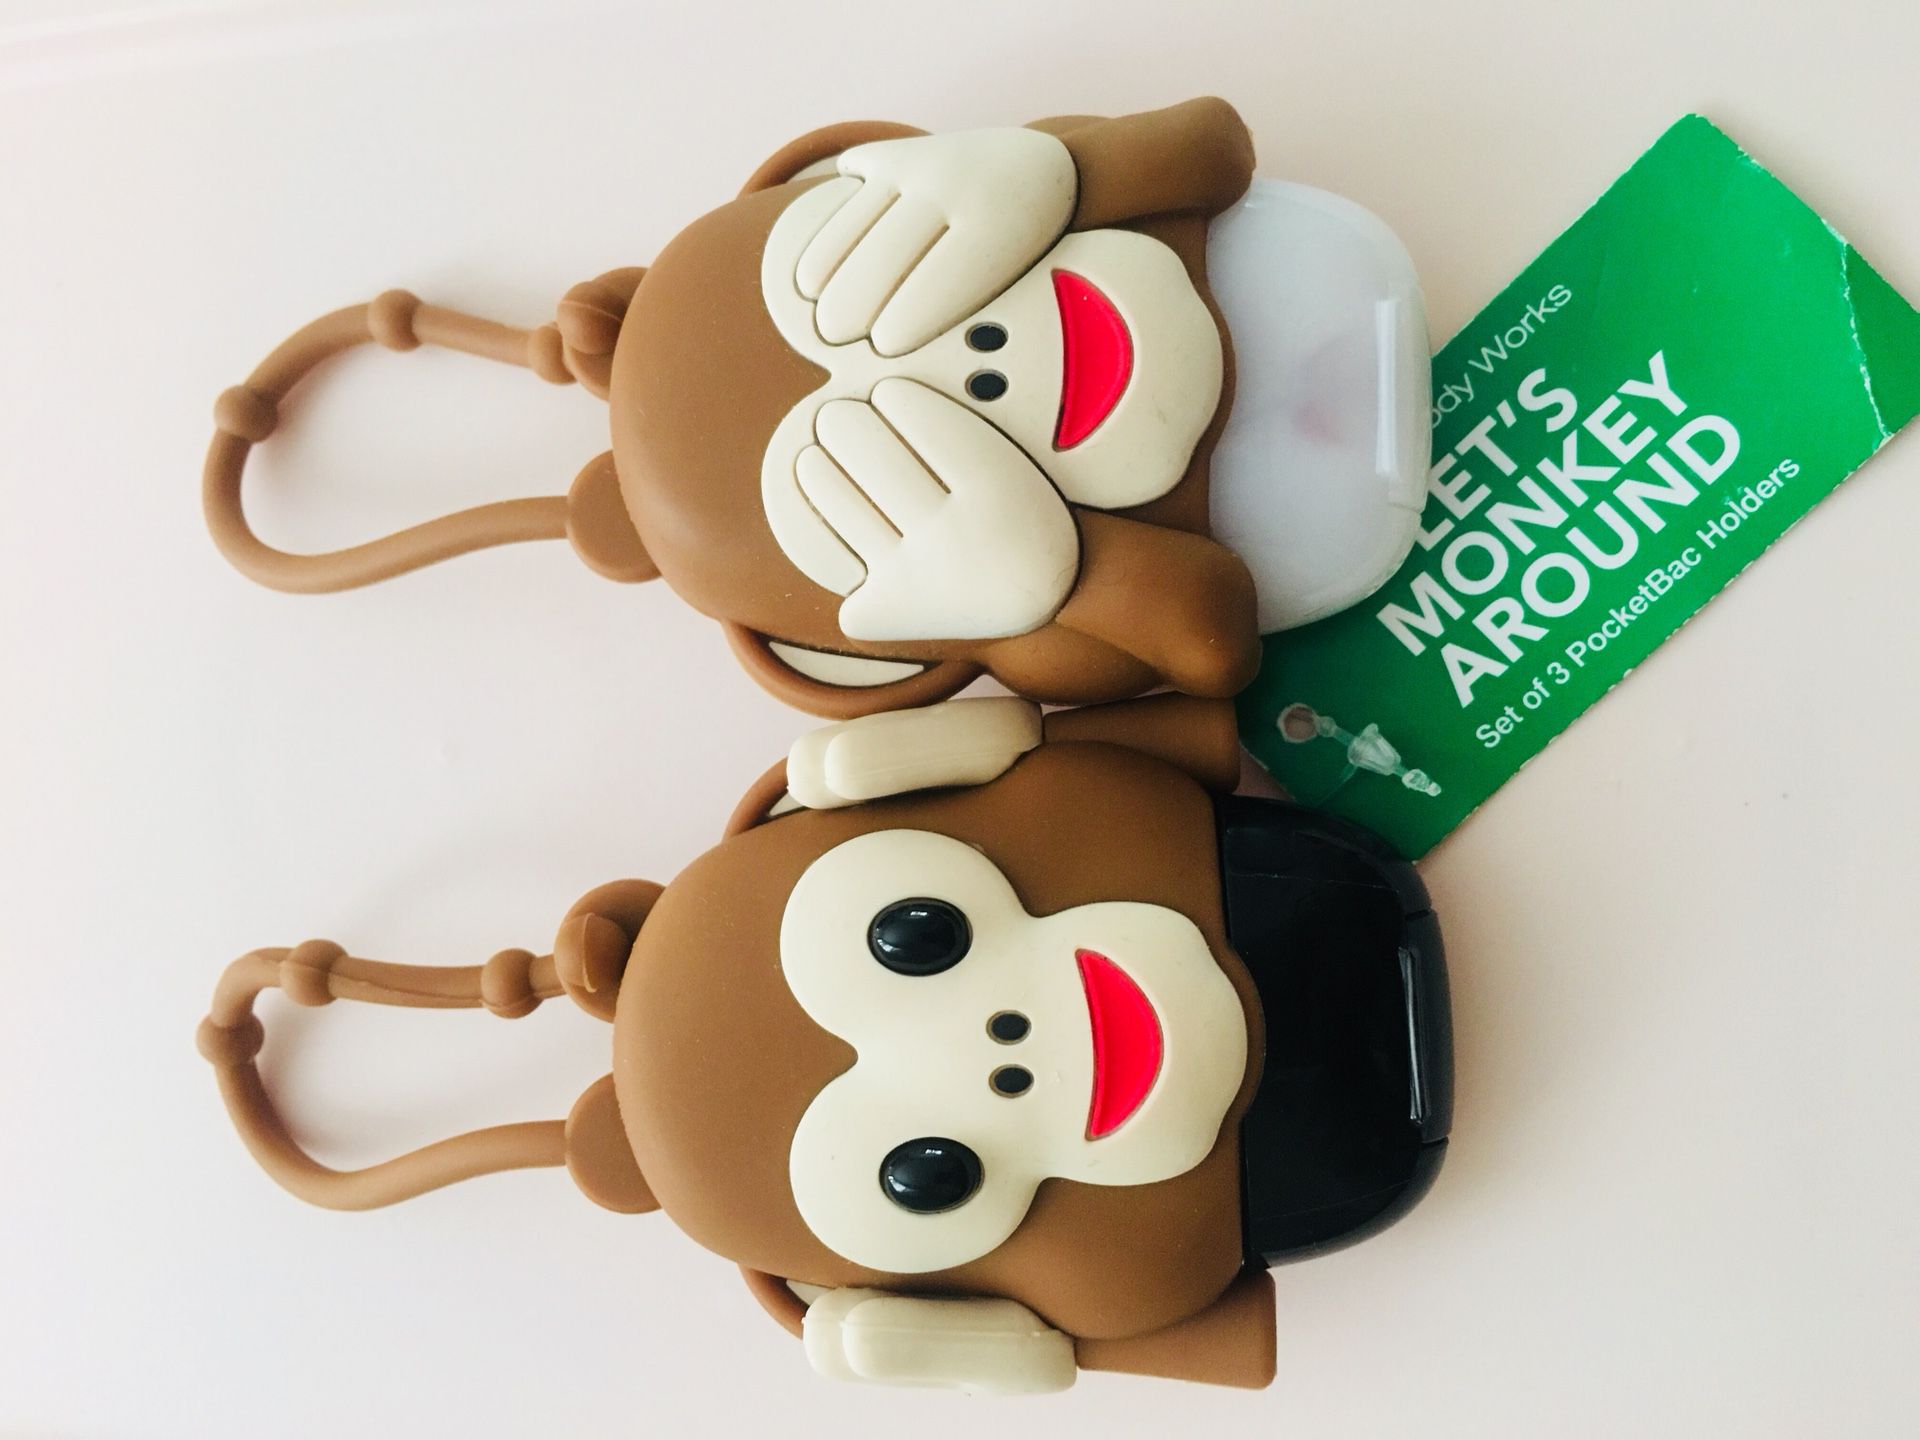 New! Bath & body works 💕super cute🙉LET’S MONKEY AROUND🙈 Pocketbac holder💕 $12 for both or $7 each